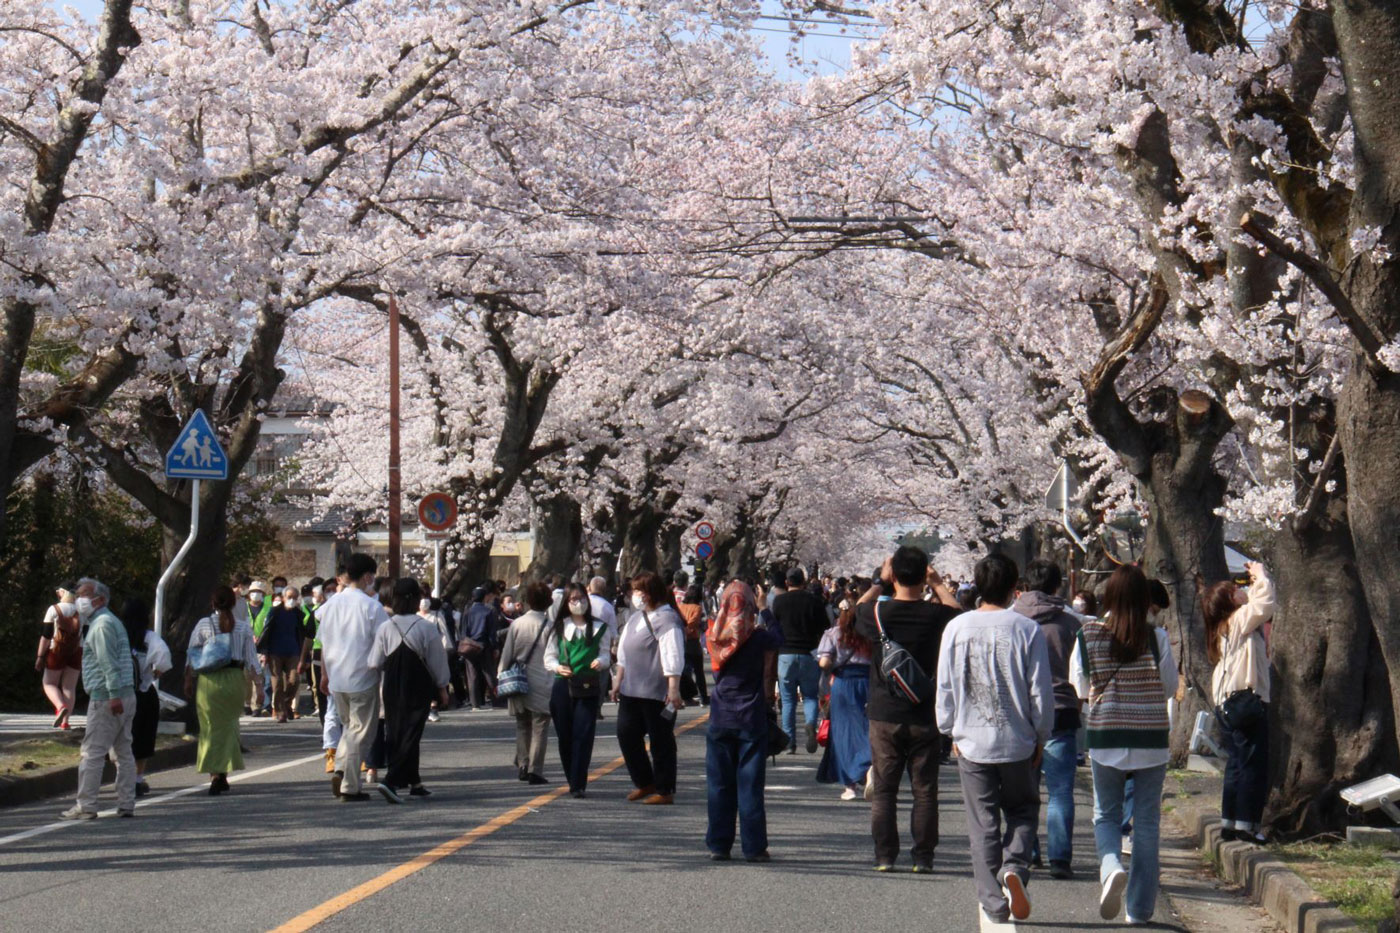 A cherry blossom festival held in April 2022 in the town of Tomioka